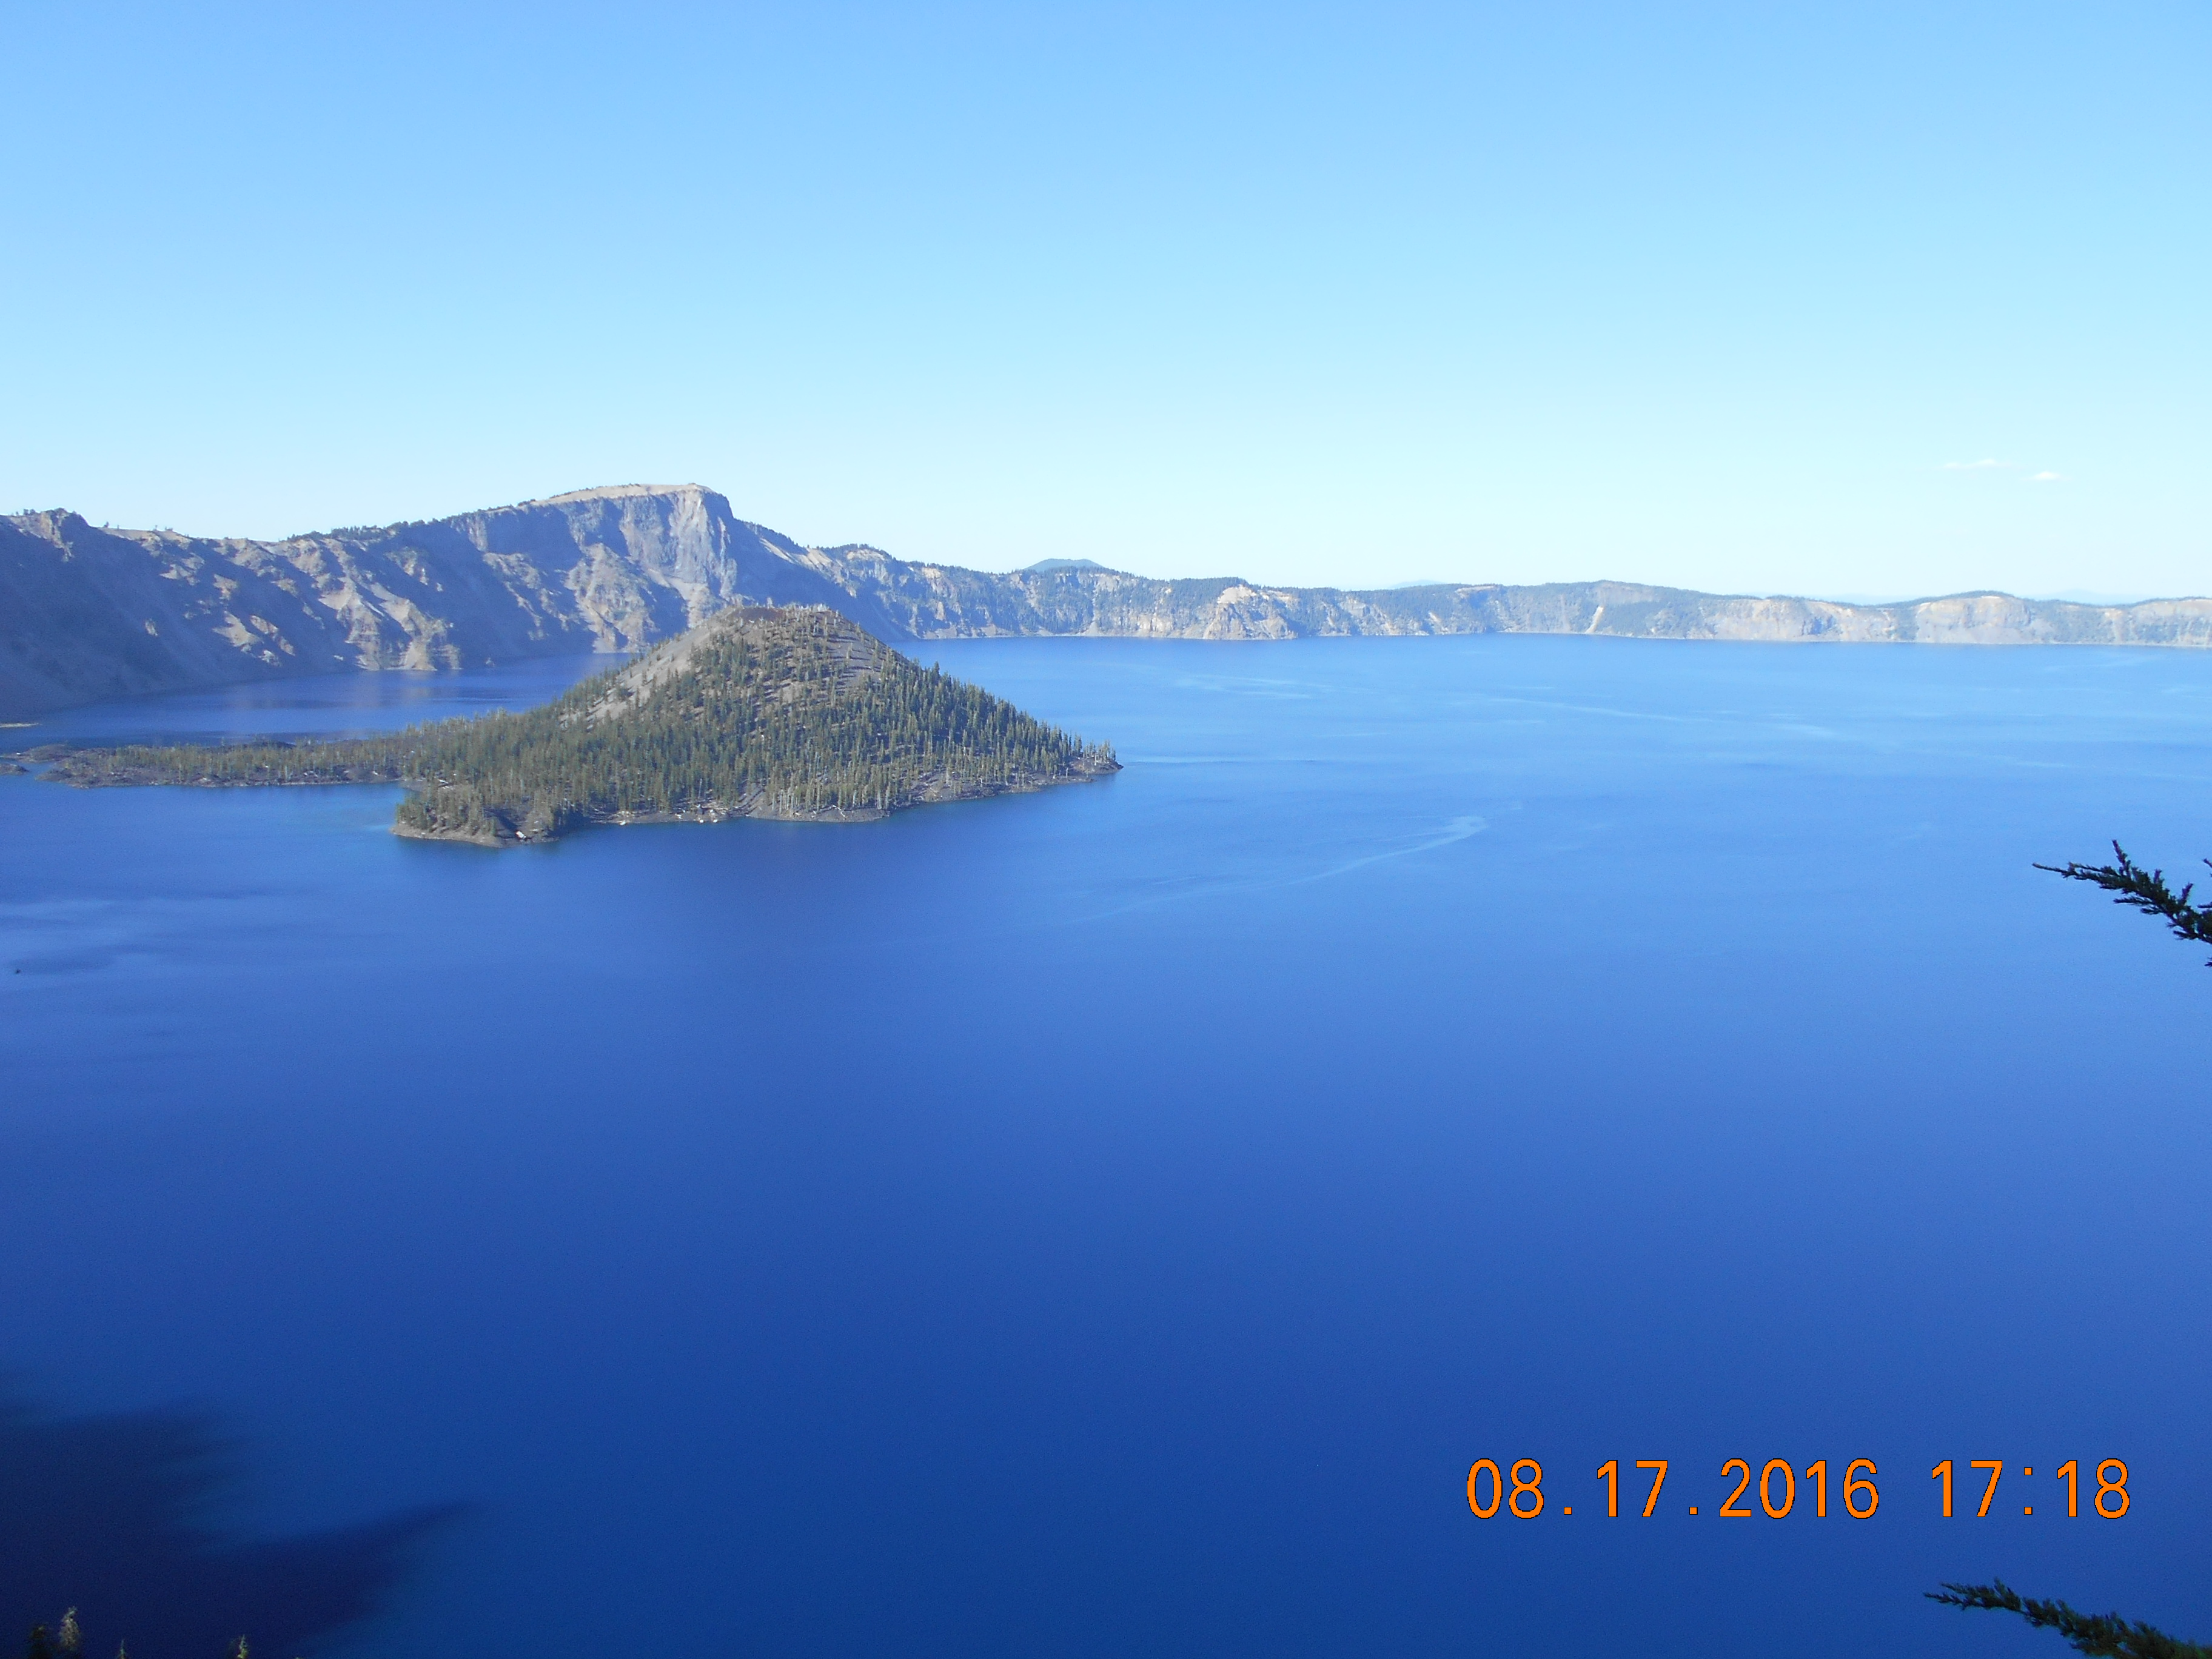 Wizard Island-Crater Lake view from Rim Village.